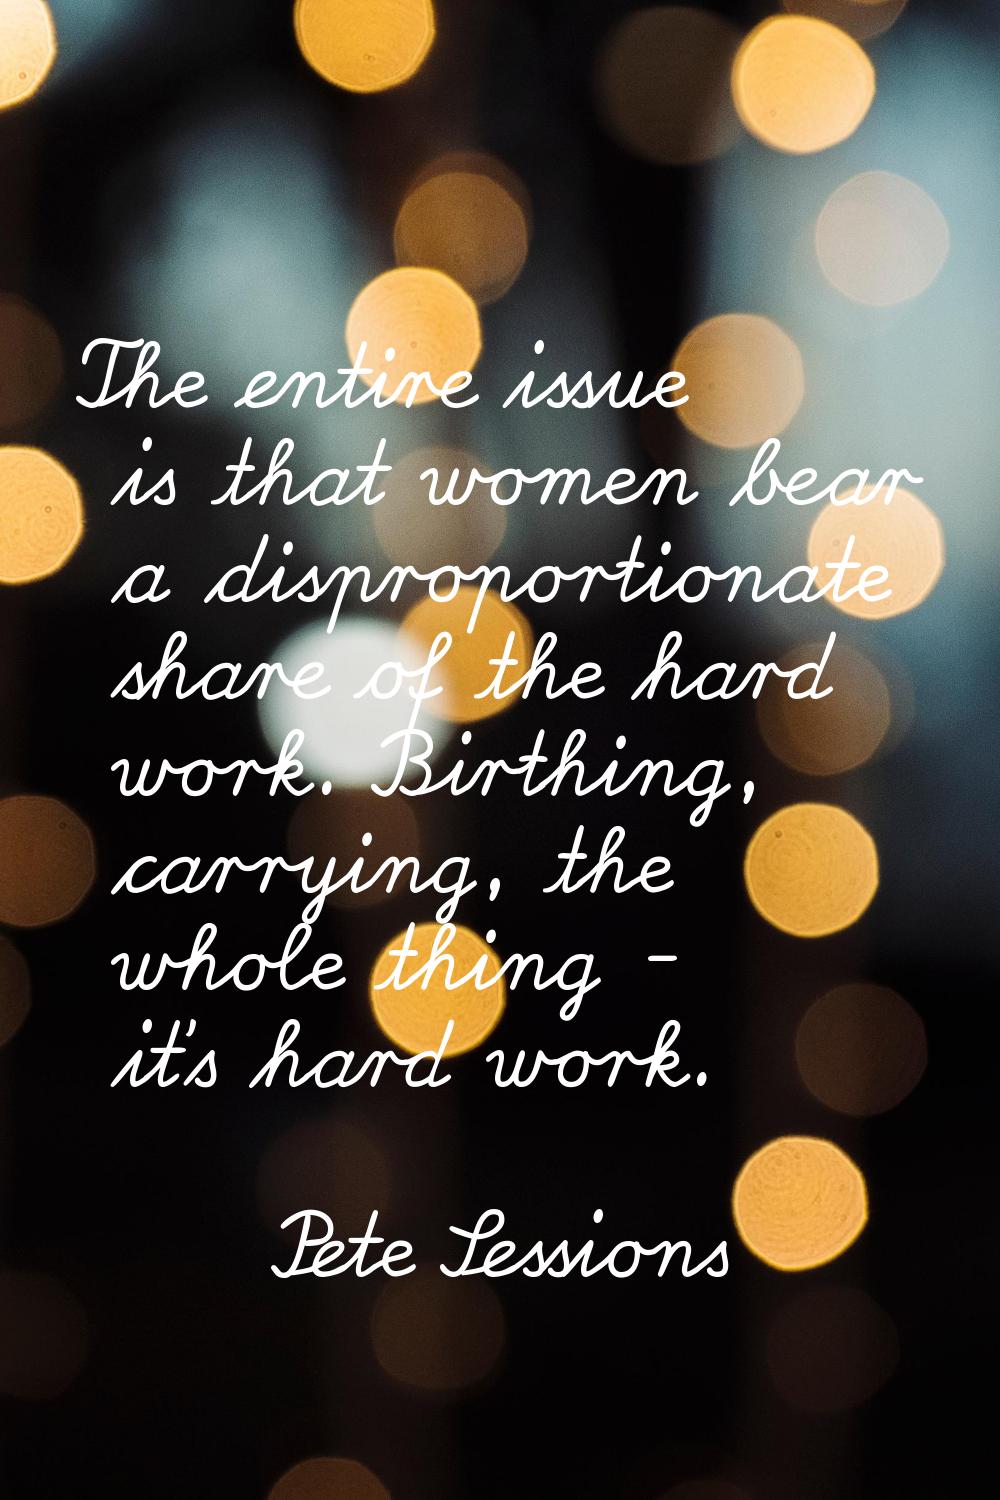 The entire issue is that women bear a disproportionate share of the hard work. Birthing, carrying, 